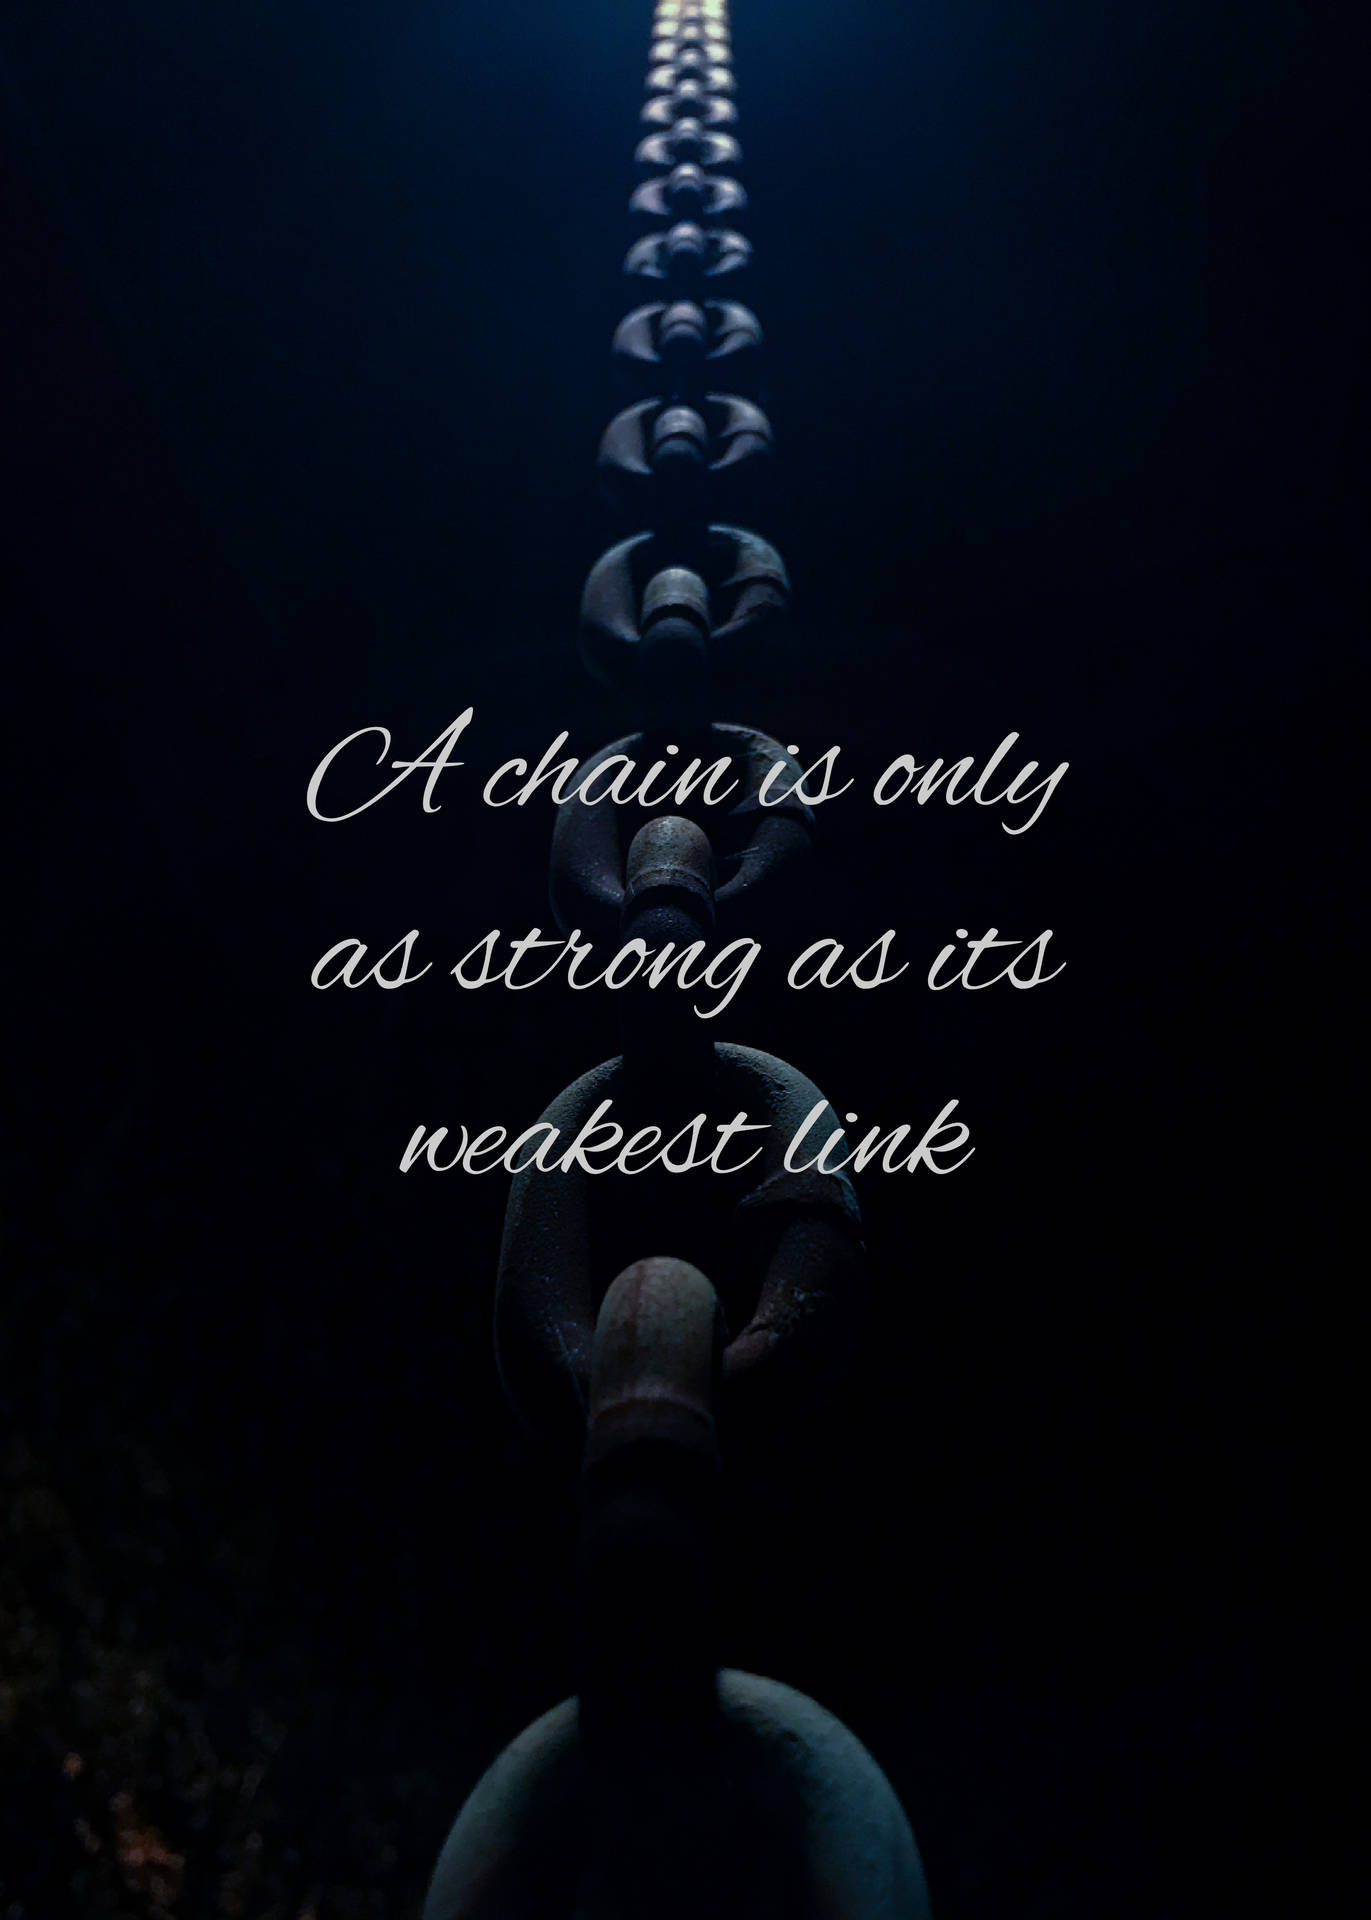 Wallpaper Chain, Strength, Weakness, Link, Phrase Background